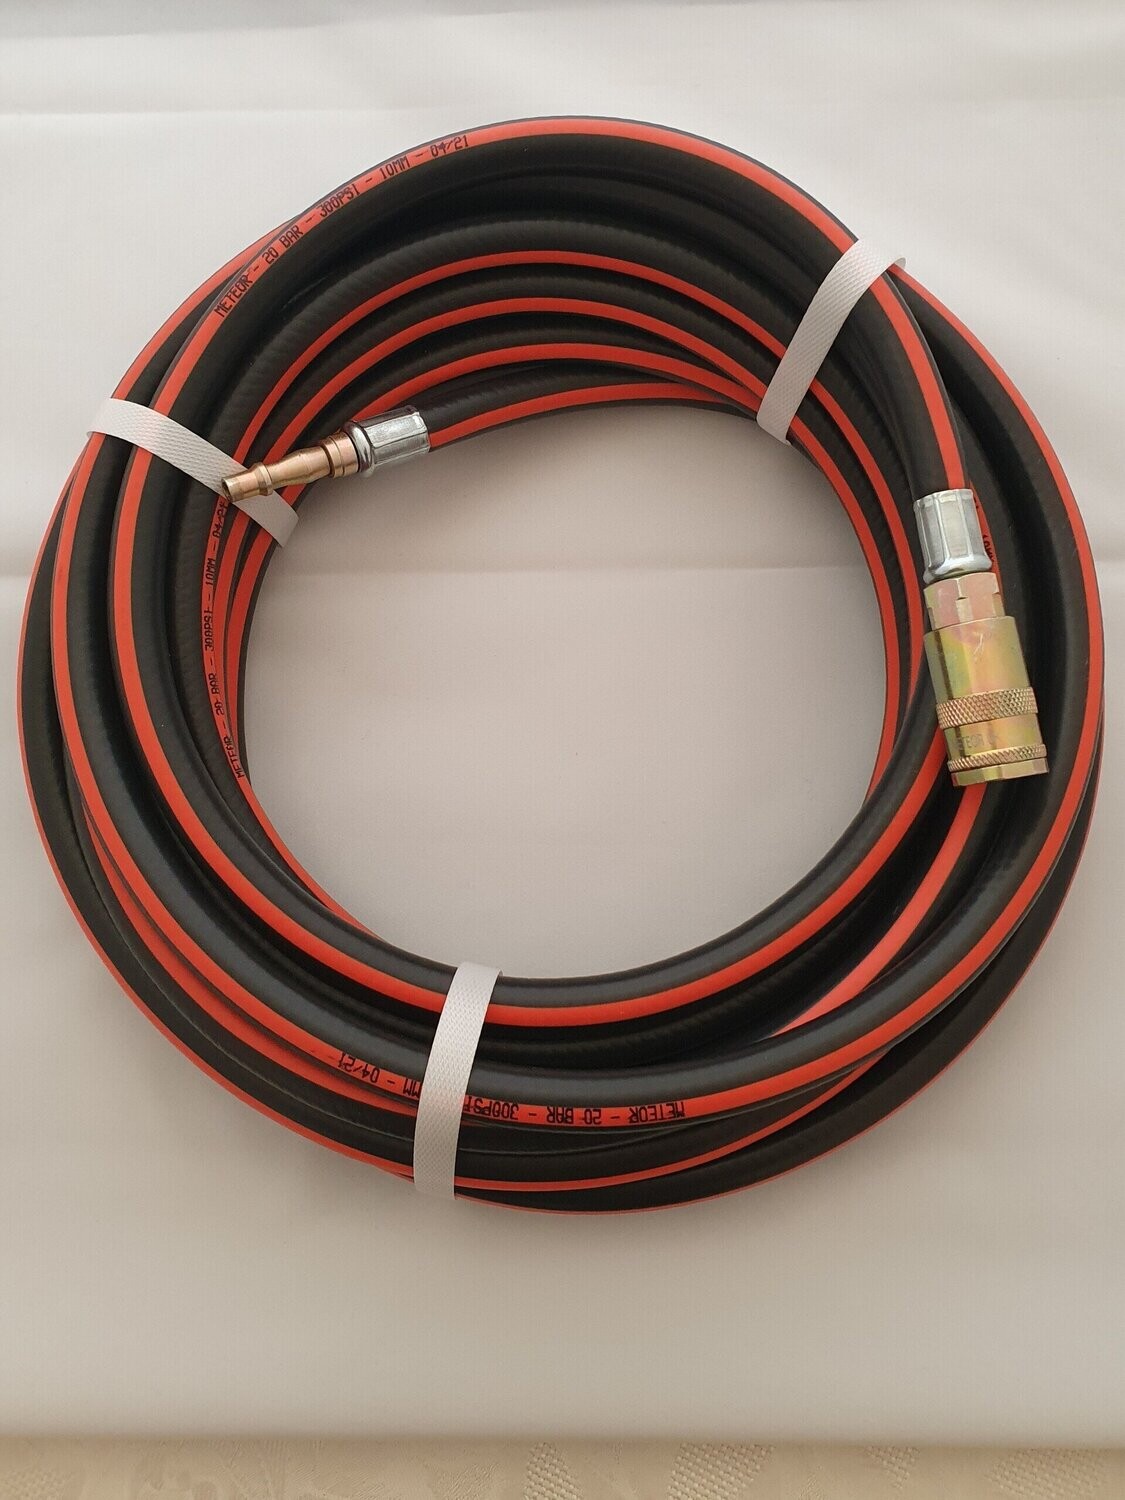 Meteor Hose Assembly 20 mtrs x 10mm (3/8") with coupling and adaptor fitted